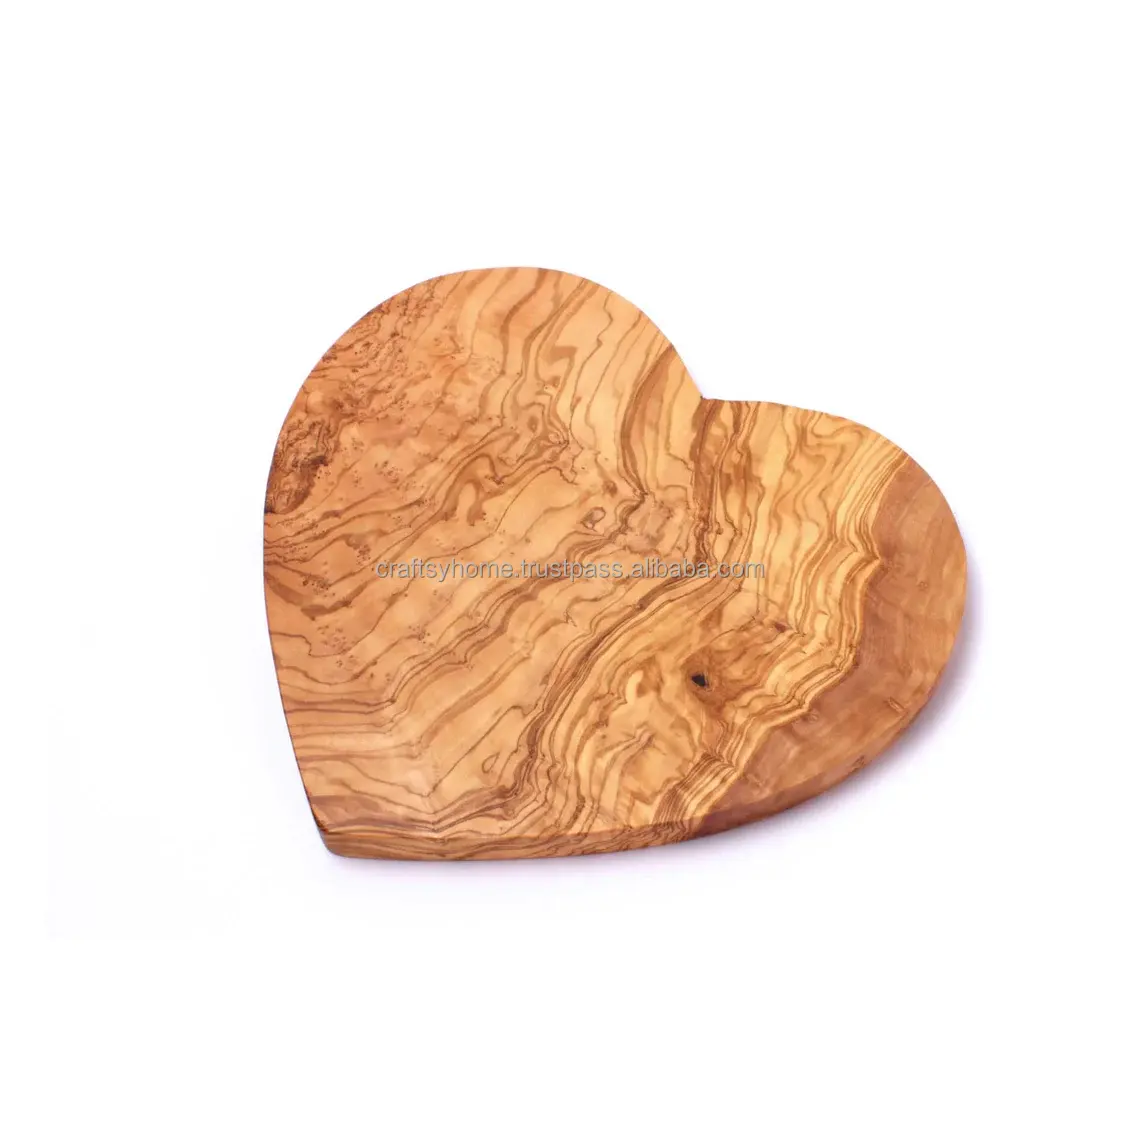 Gift ways best olive wood Heart shape charcuterie board cheese board acacia wood cutting board serving tray